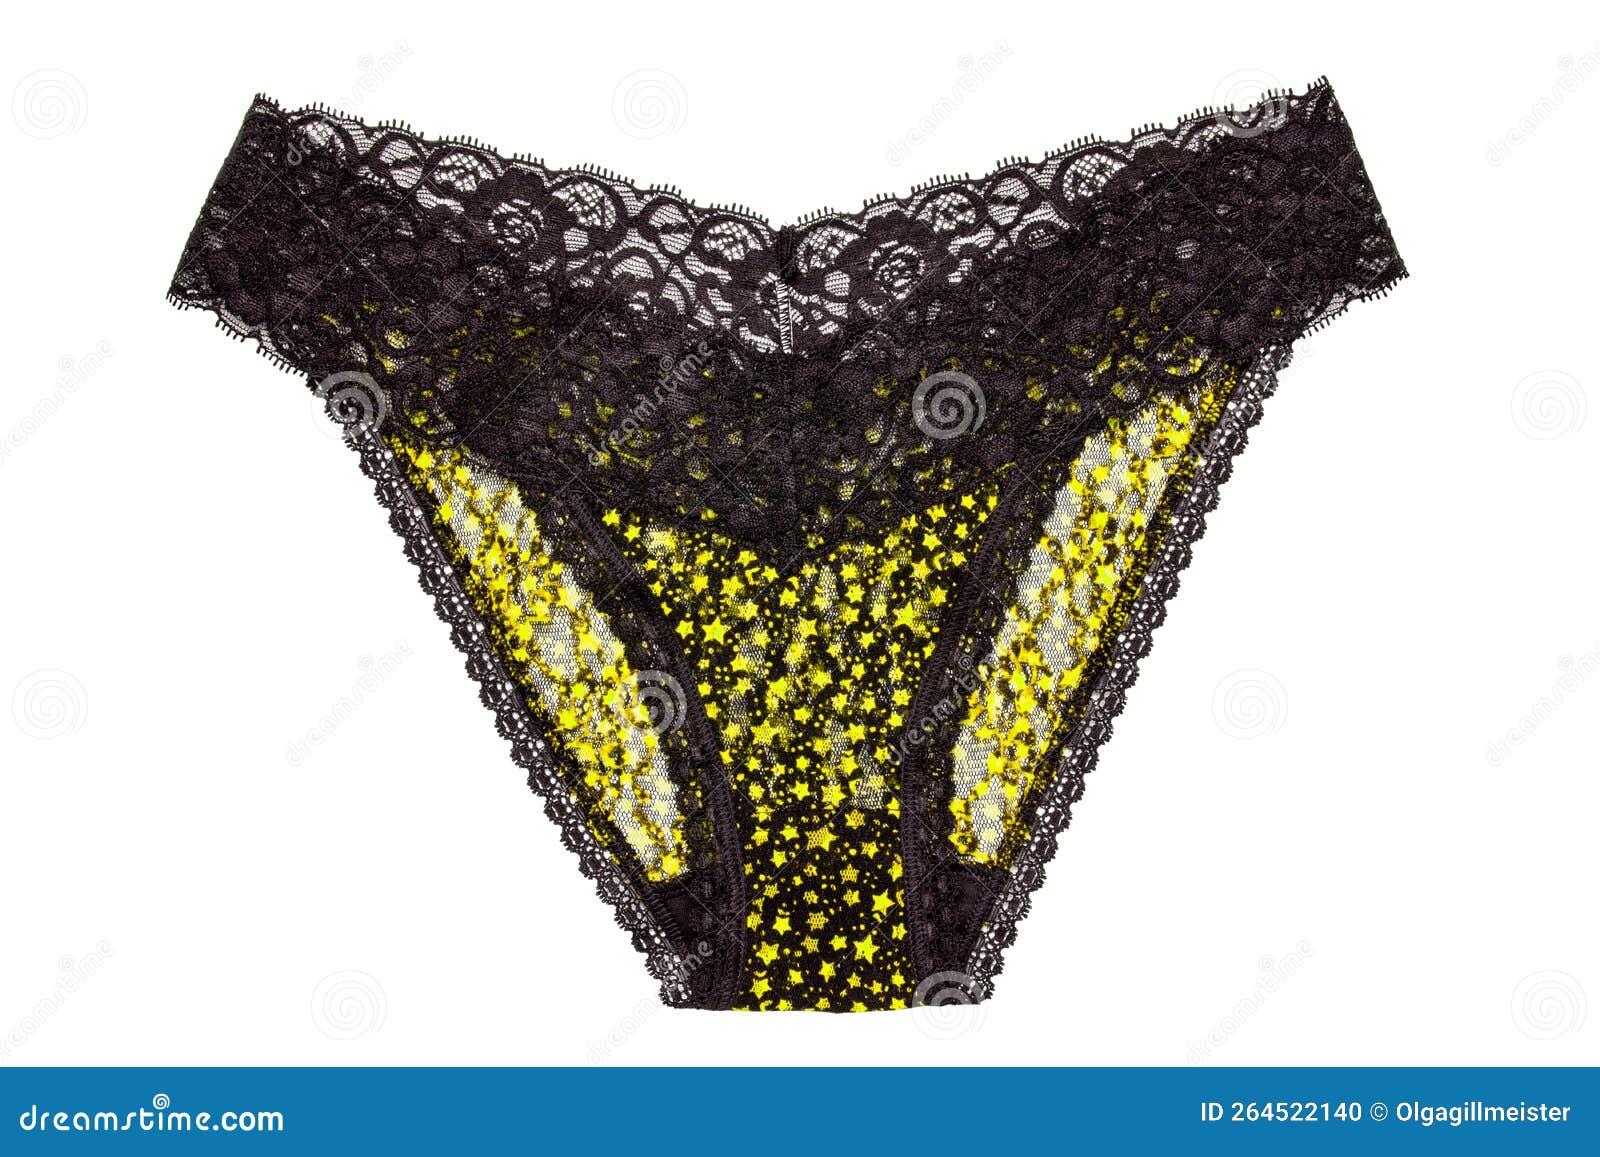 Underwear Woman Isolated Close Up Of Luxurious Elegant Black Lacy Thongs Panties With Colorful